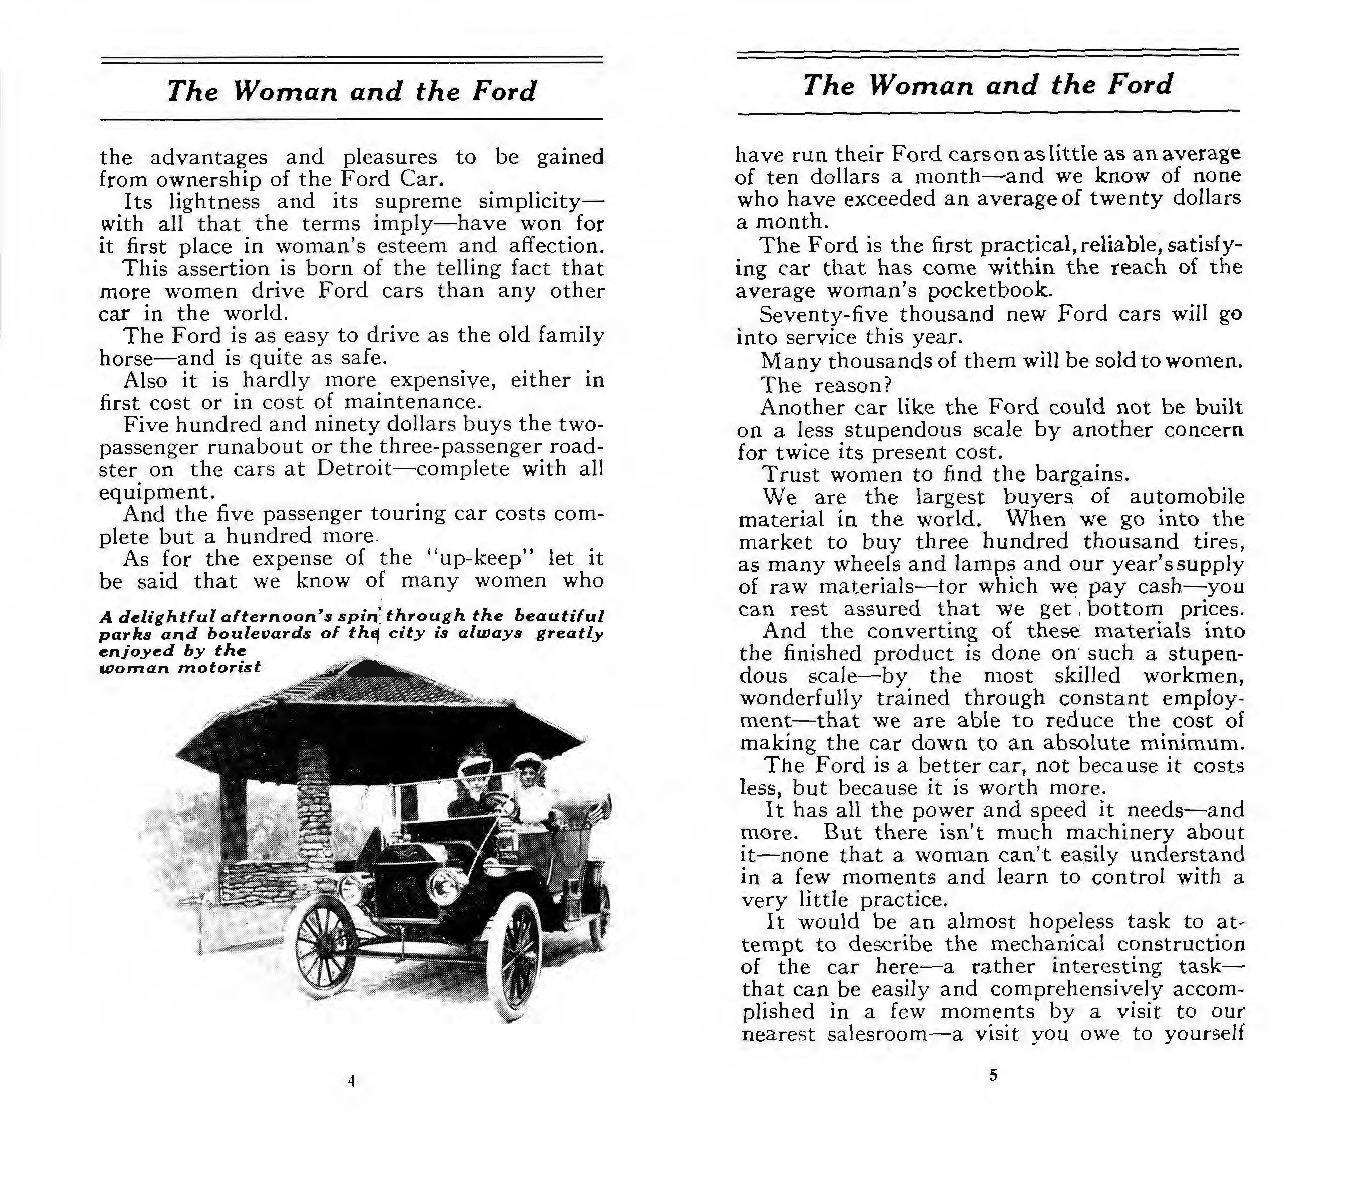 n_1912 The Woman & the Ford-04-05.jpg